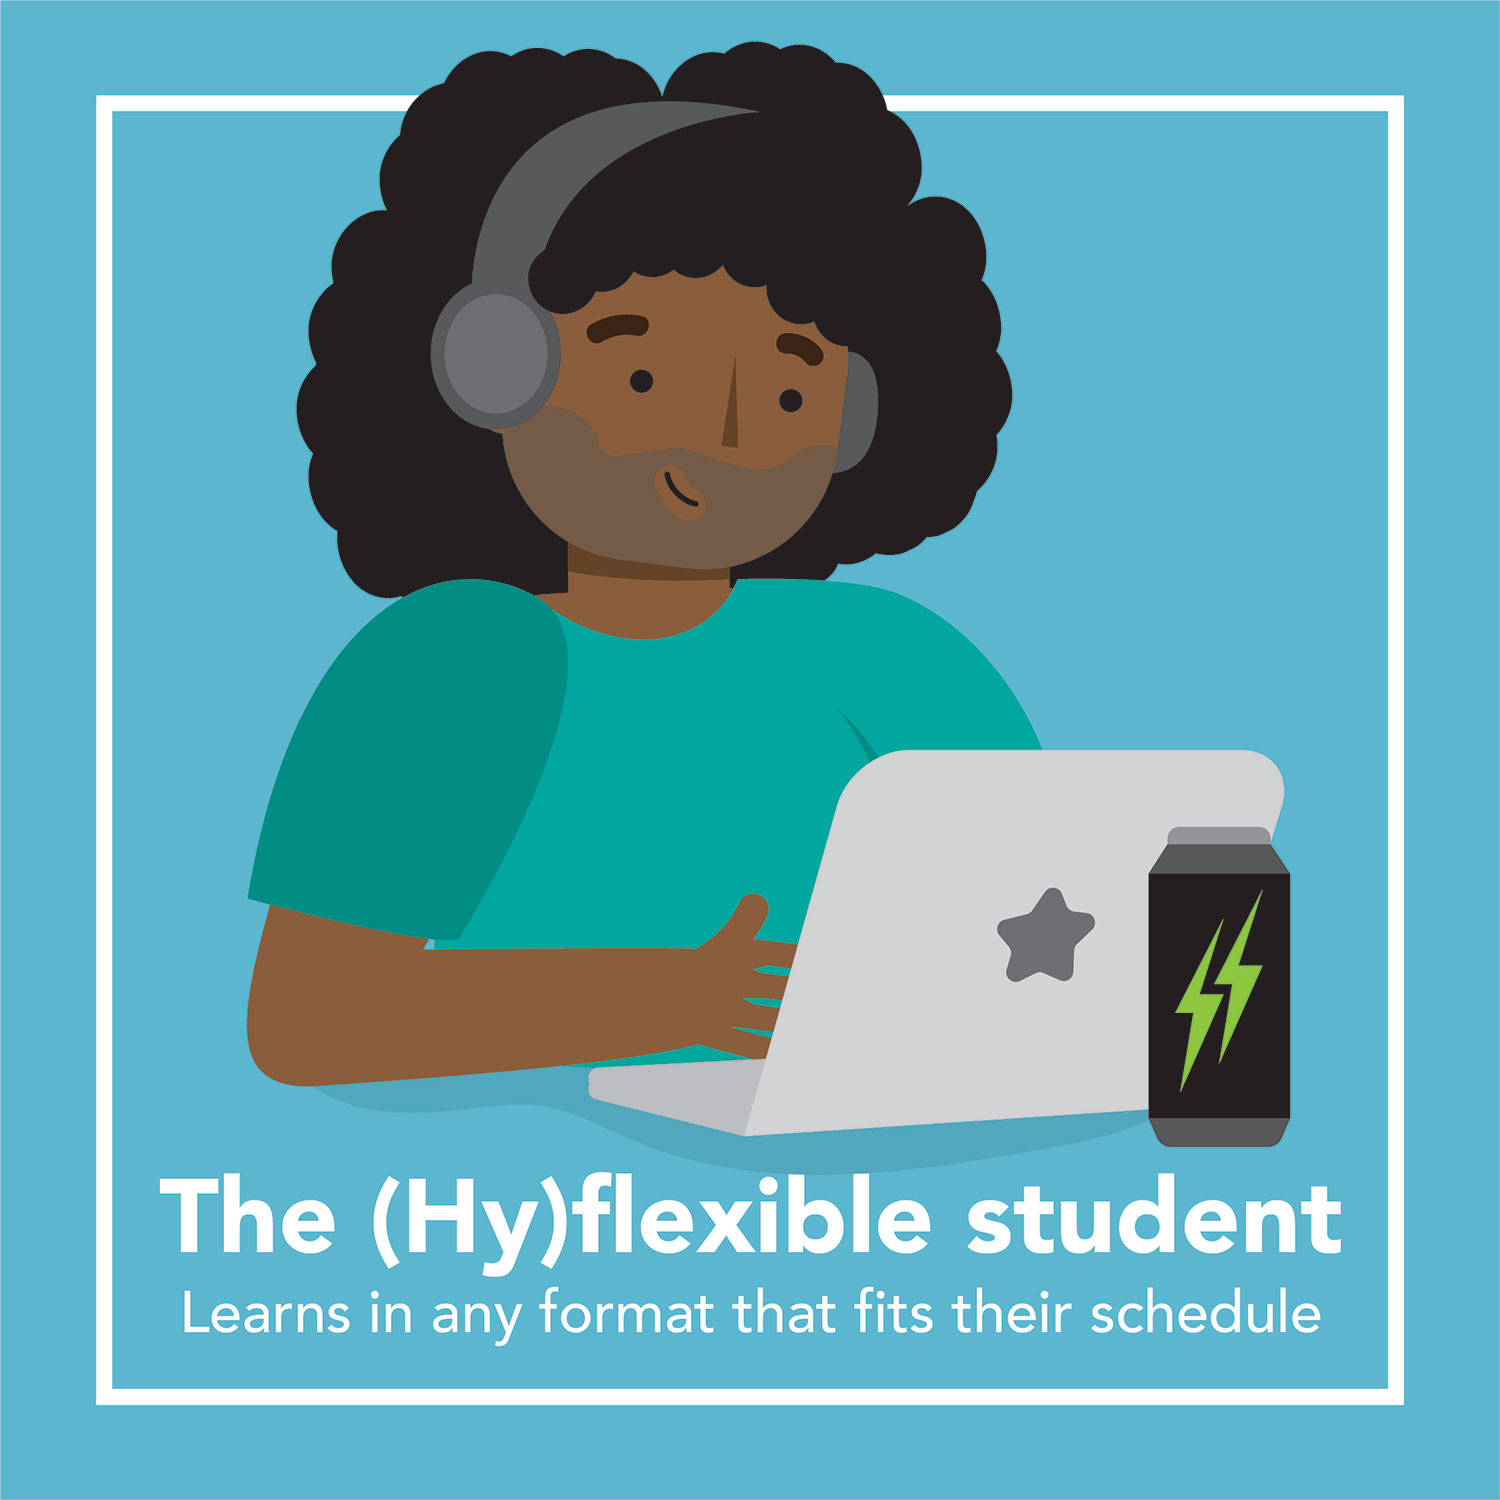 the (hy)flexible student - learns in any format that fits their schedule